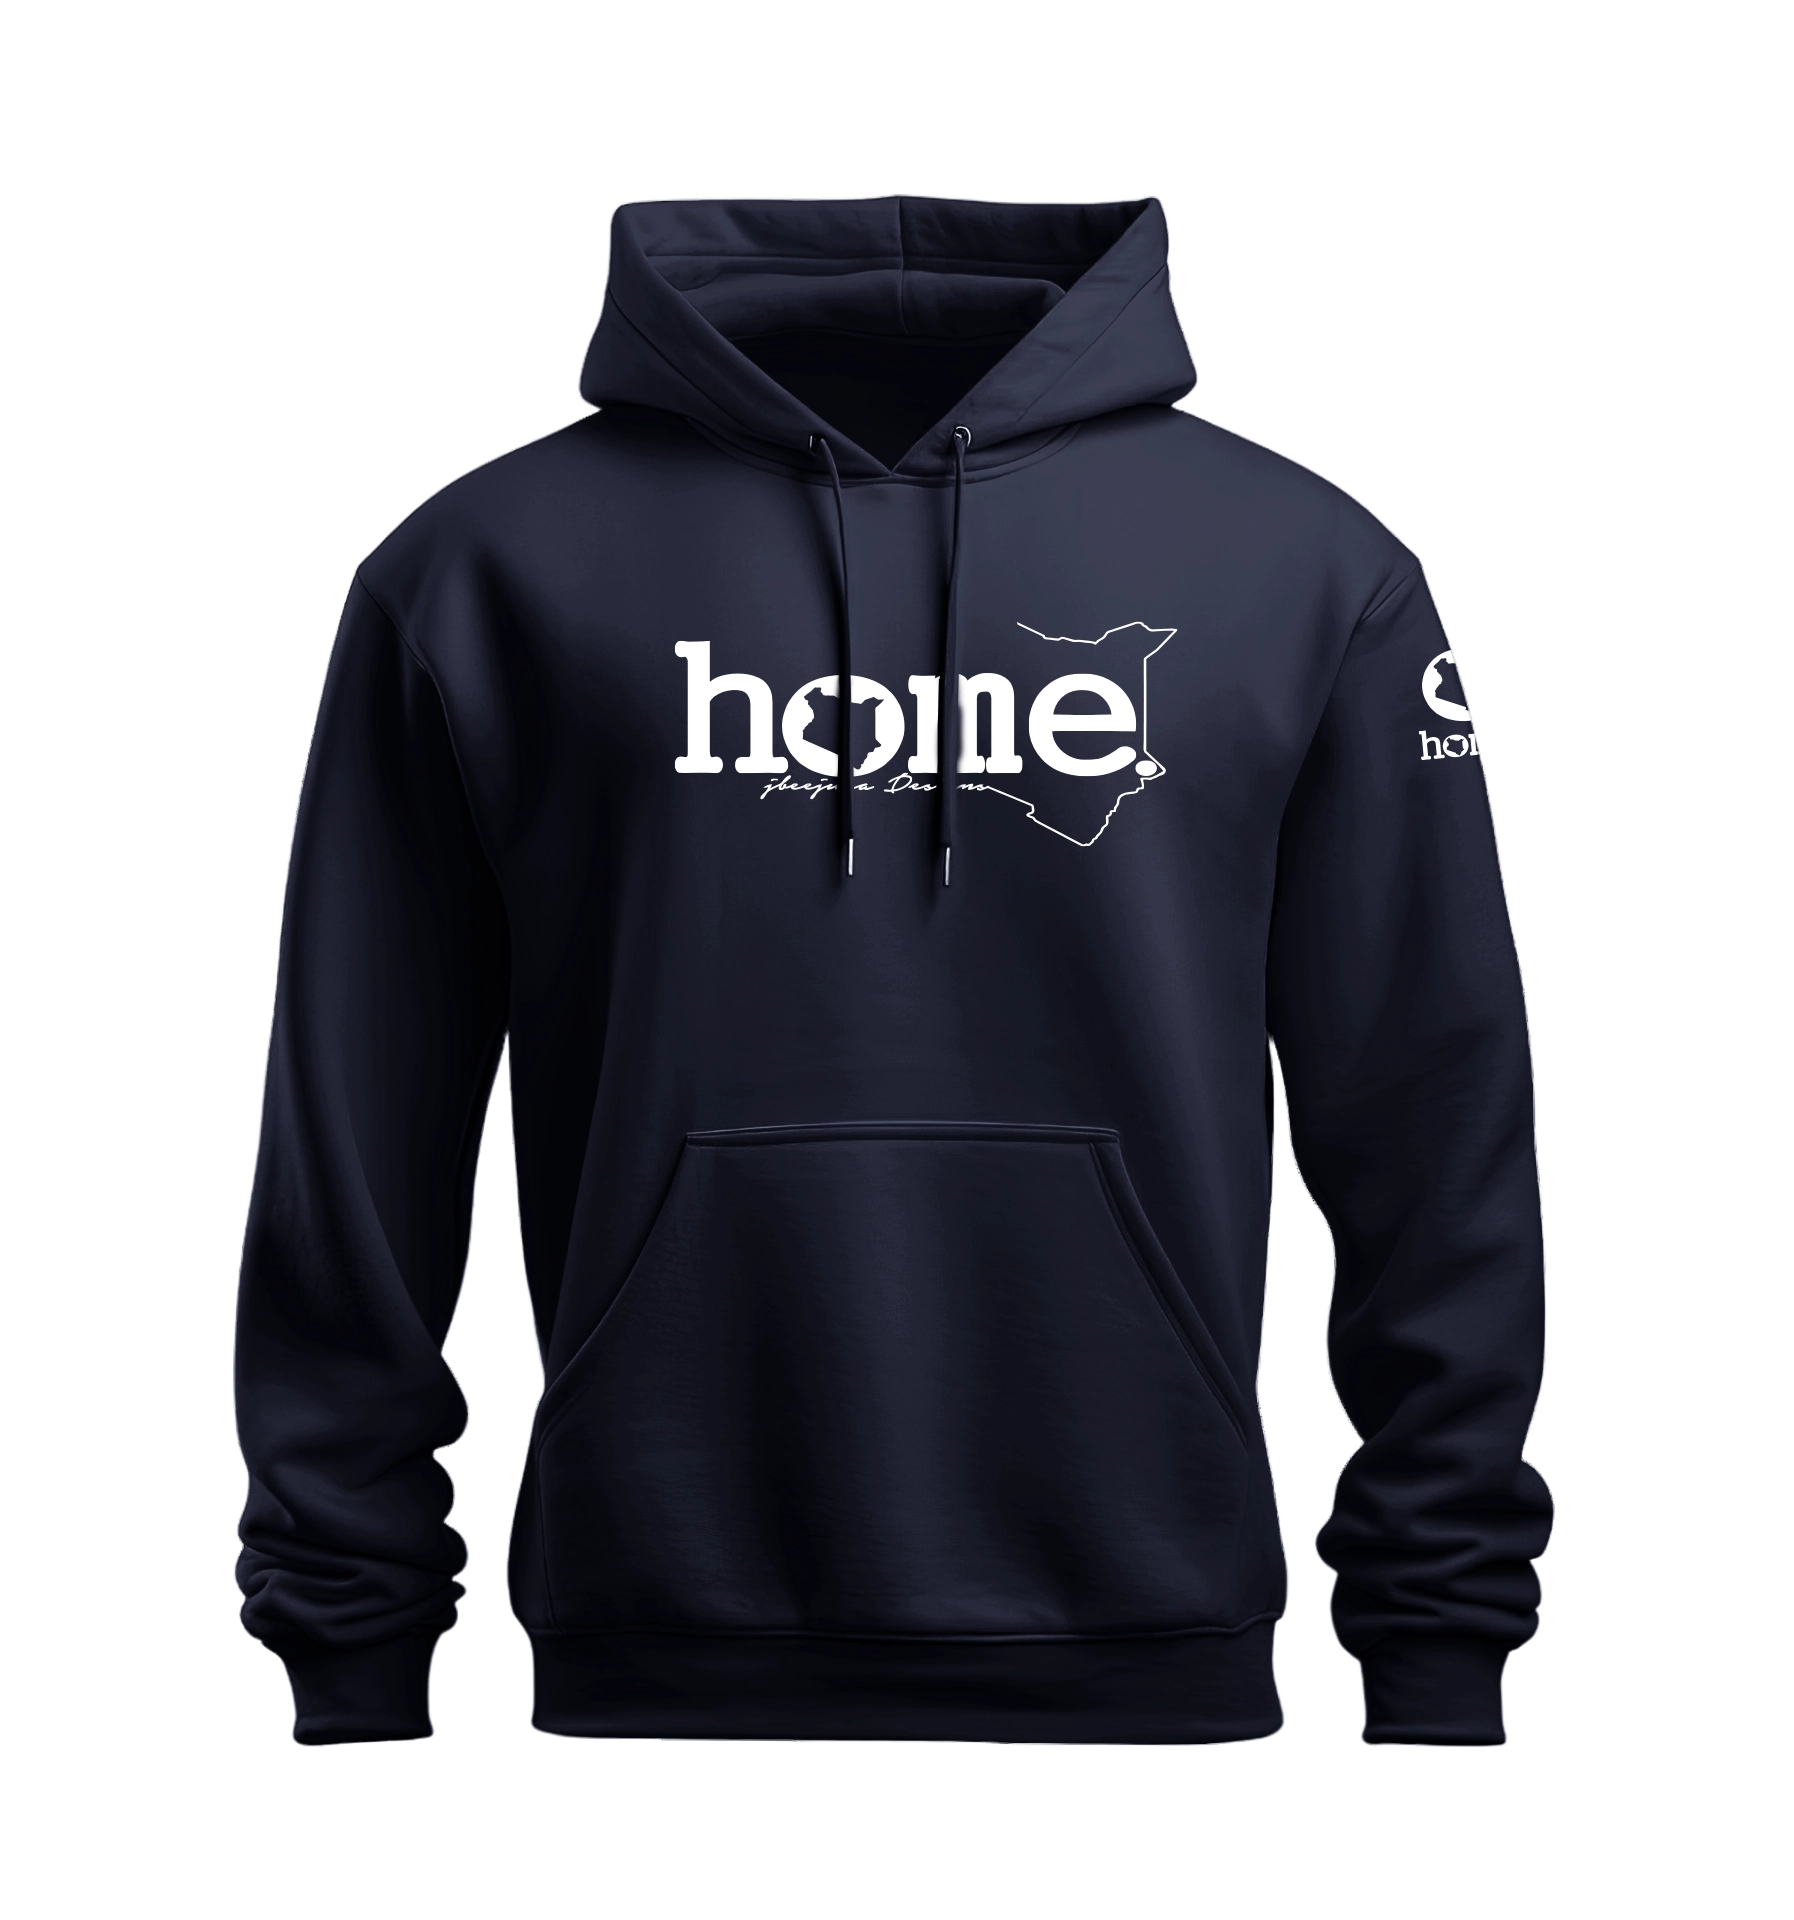 home_254 NUVETRA™ NAVY BLUE HOODIE WITH A WHITE ROMAN NUMERALS PRINT 